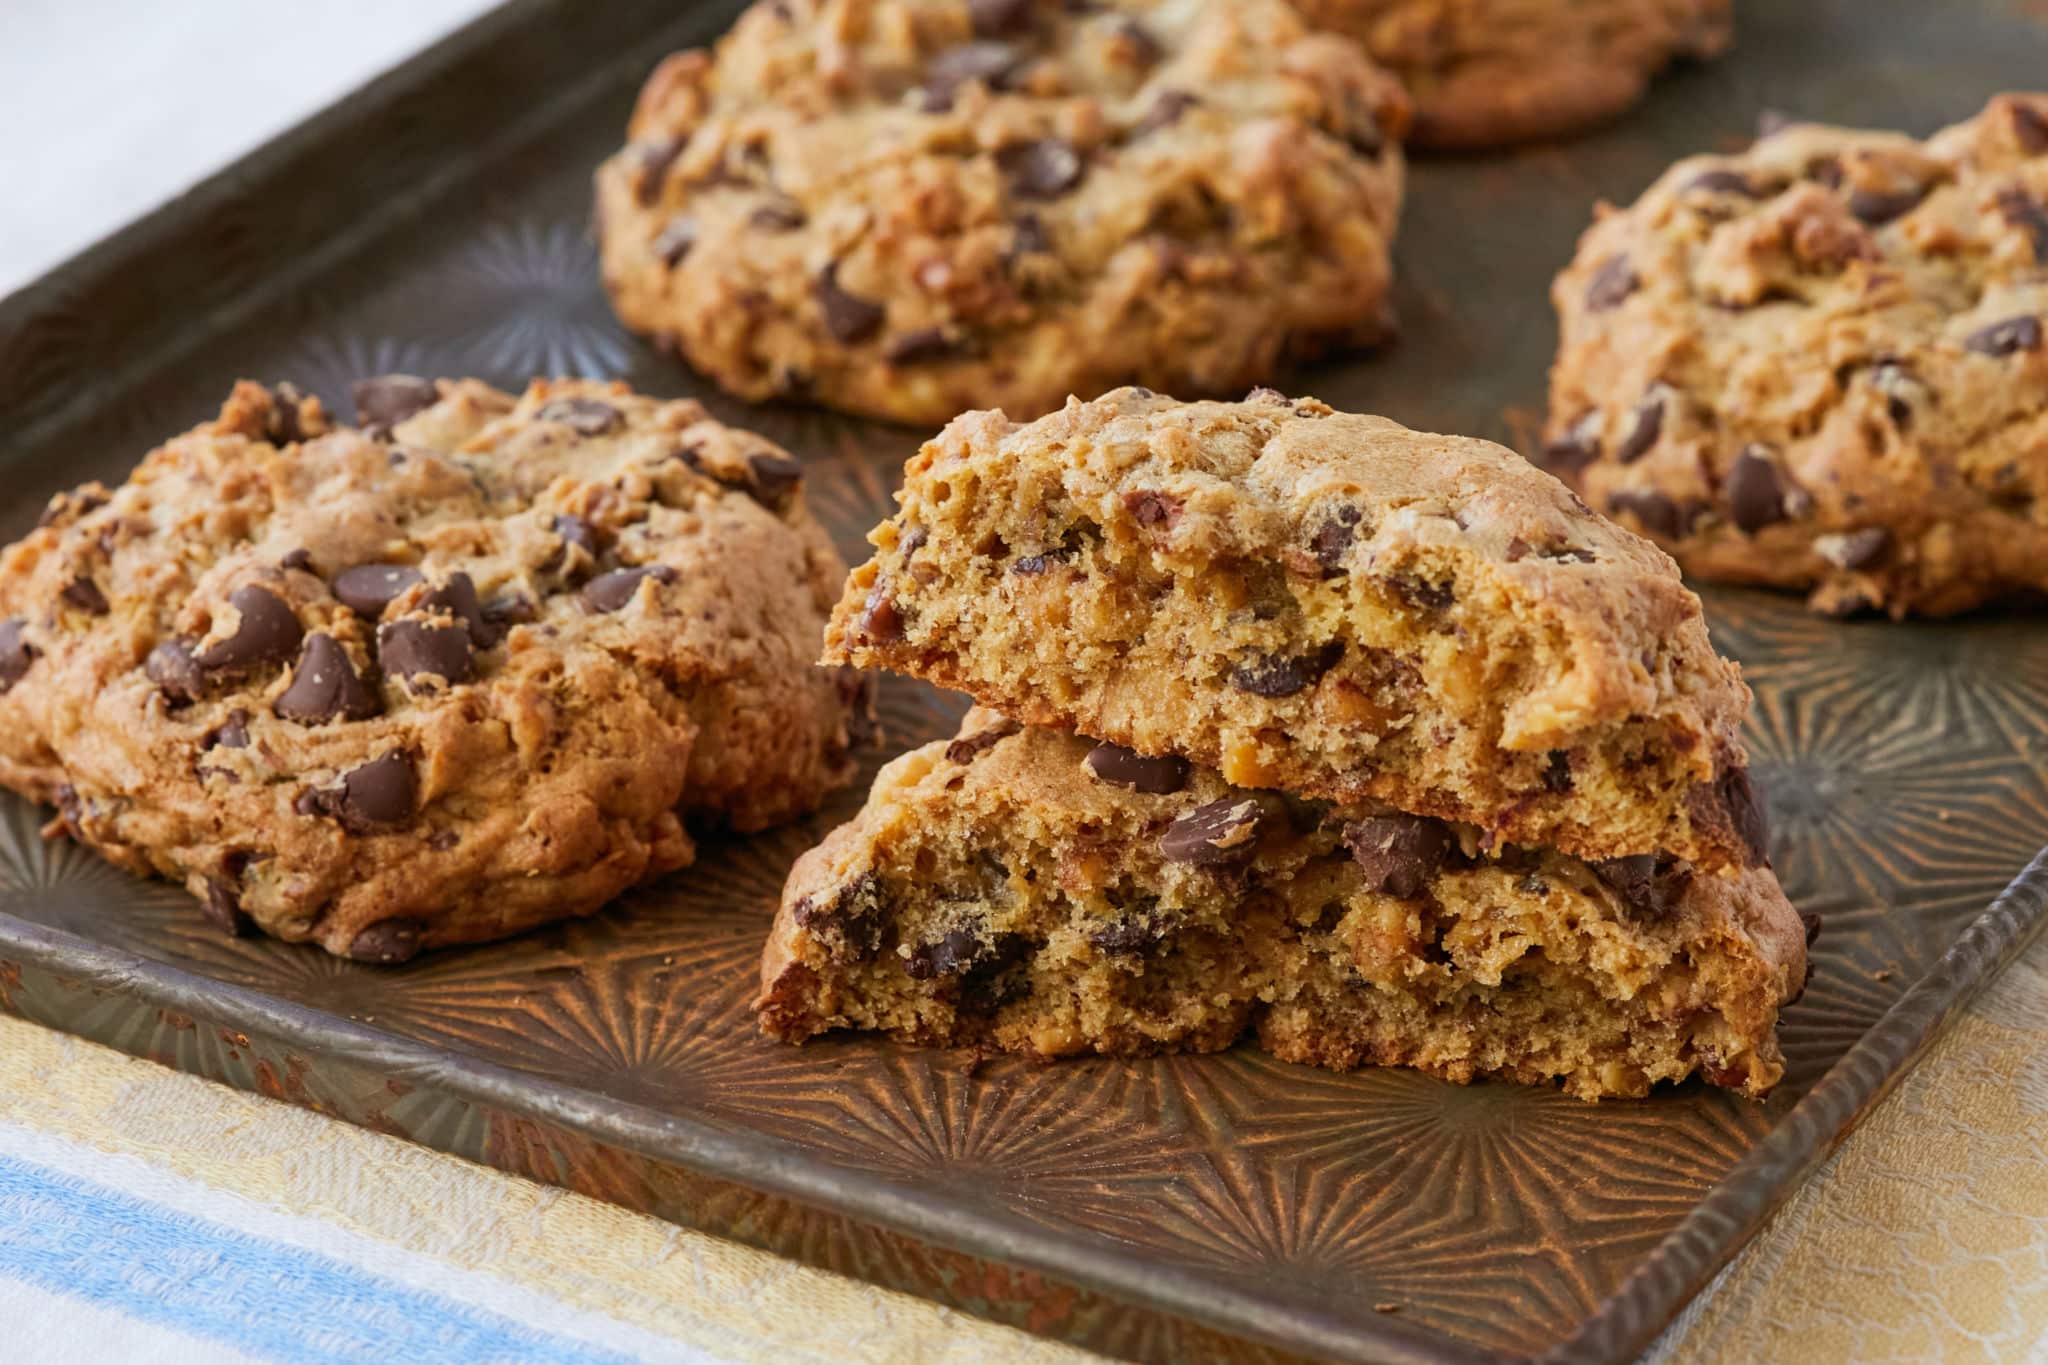 Levain Bakery-Style Super-Thick Chocolate Chip Cookies Recipe